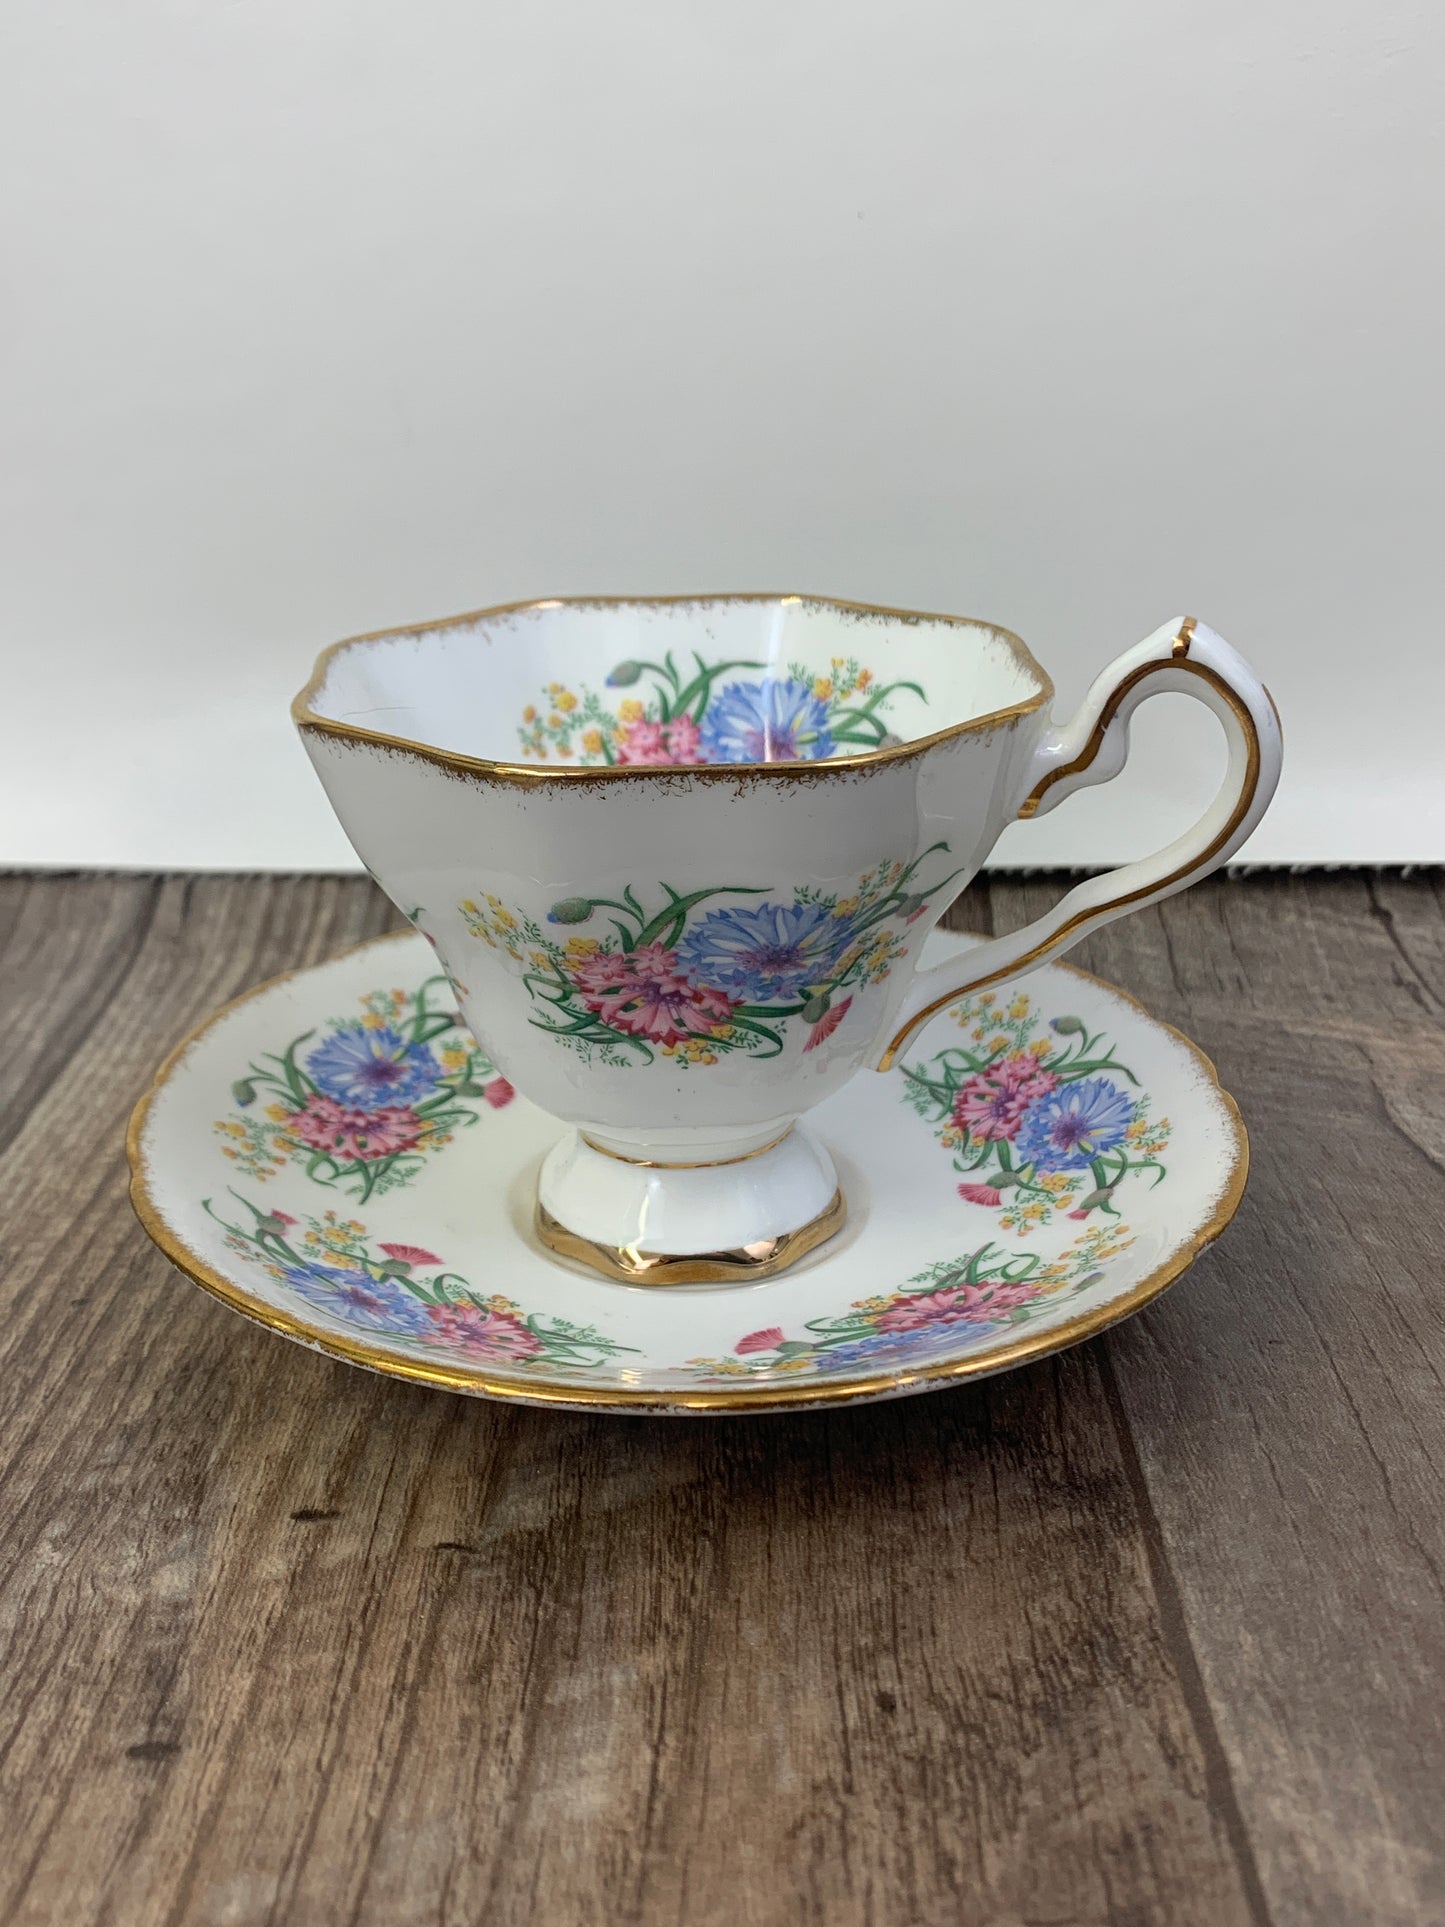 Pink and Blue Thistles Stafford Floral Tea Cup Vintage Teacup with Pink and Blue Floral Pattern